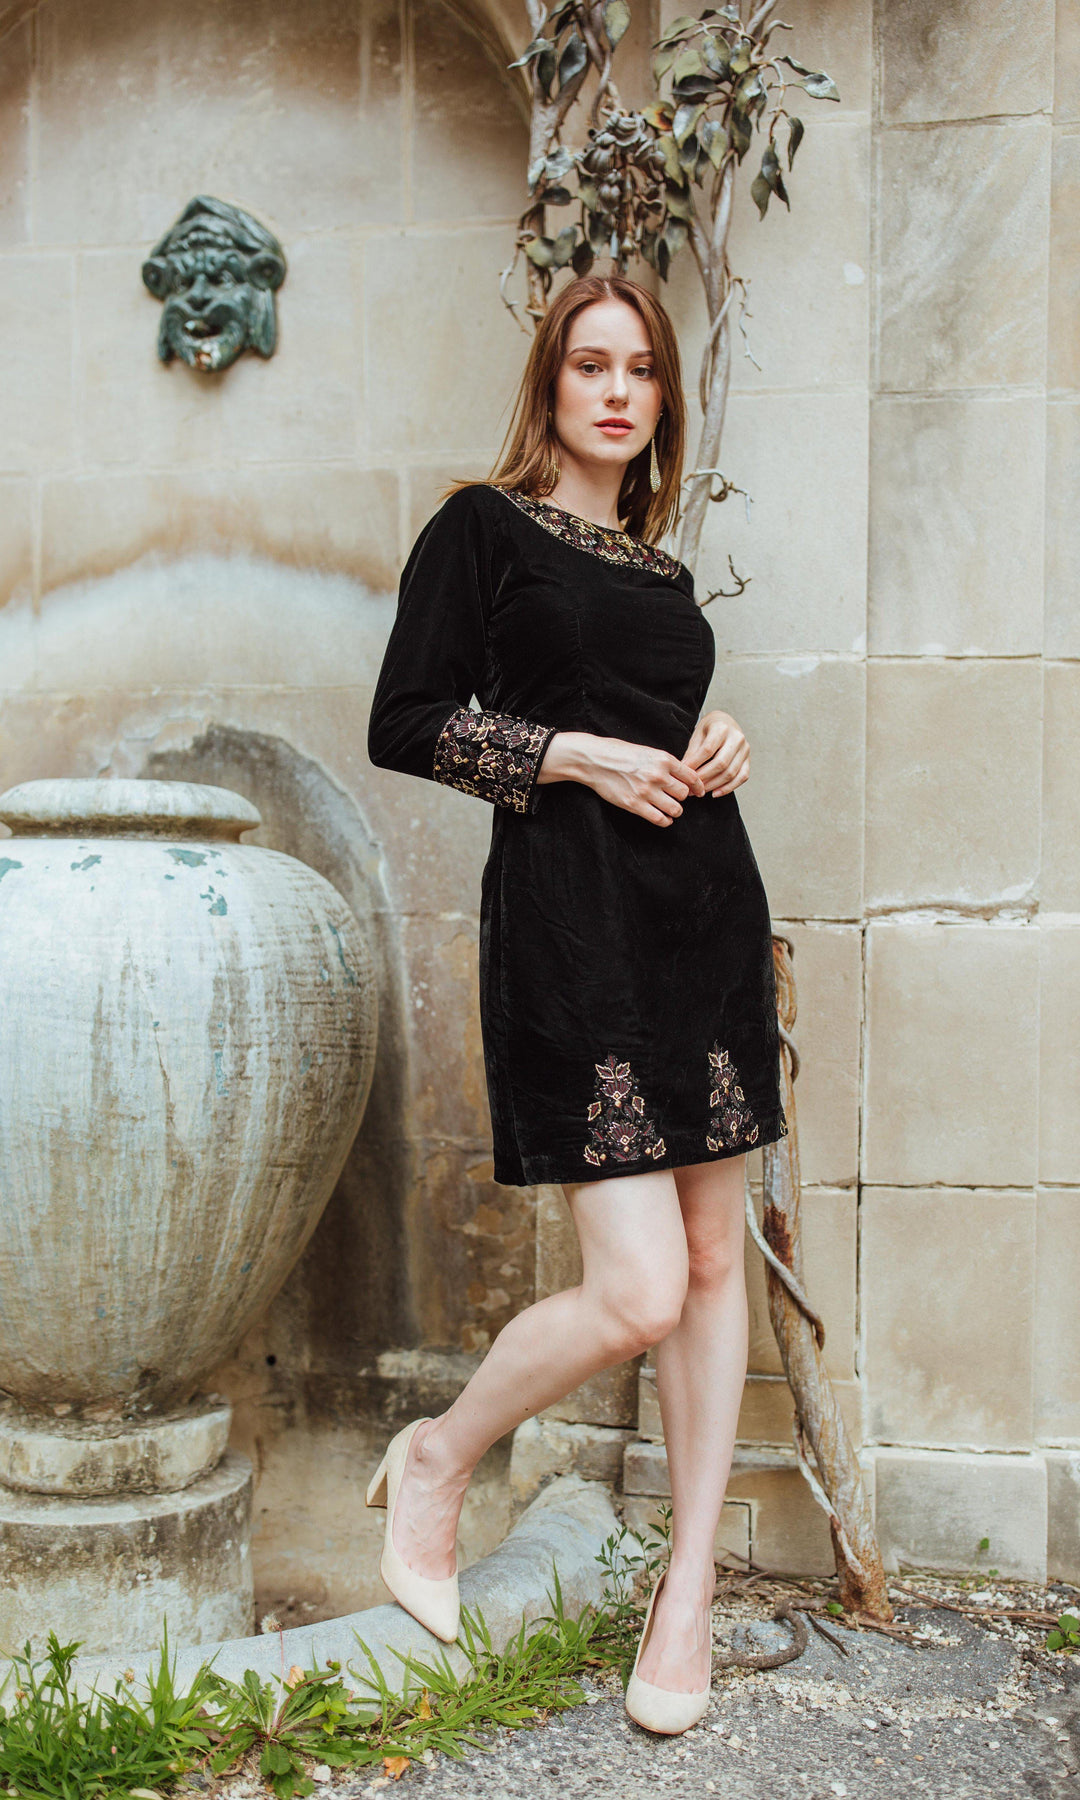 D1055 black dress with hand embroidery-dresses-[Tunics]-[Womens Tops]-[Croptops]